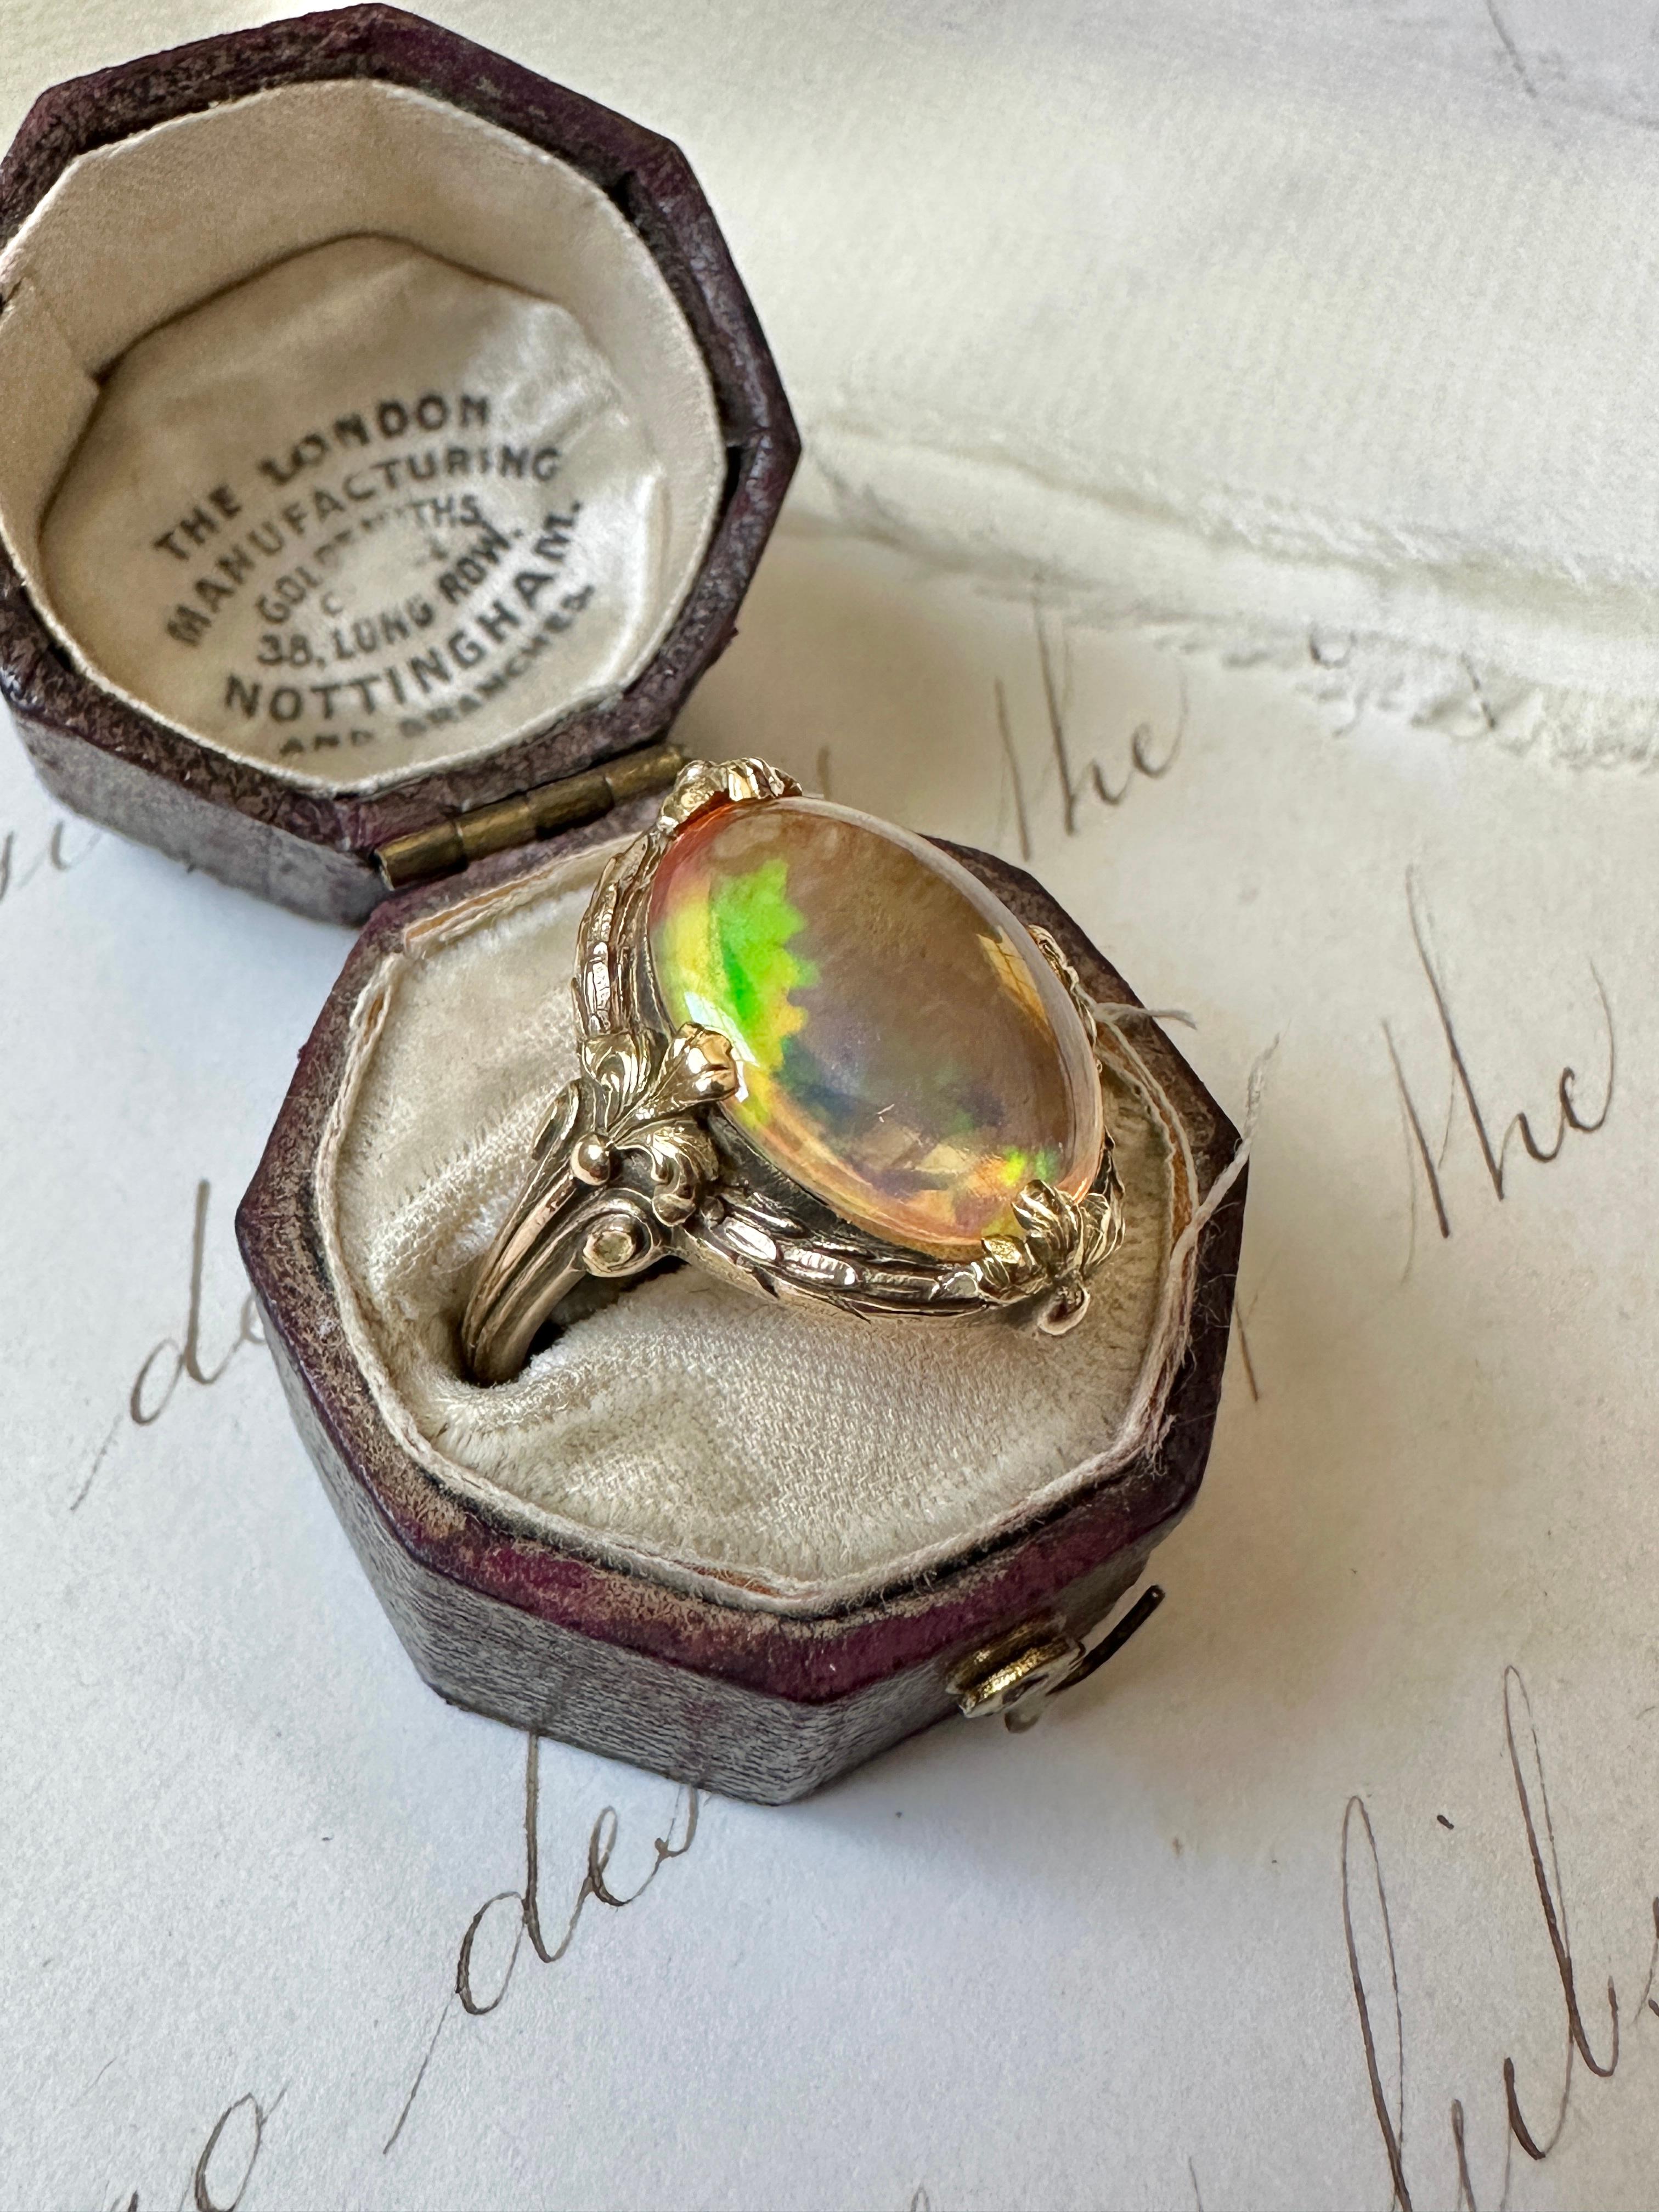 Dating from the early 20th century, this delightful Art Nouveau ring centers on a glowing opal filled with confetti like flashes of bright yellow, vibrant red, brilliant blue and neon green. The opal is presented in a sculpted laurel leaf border